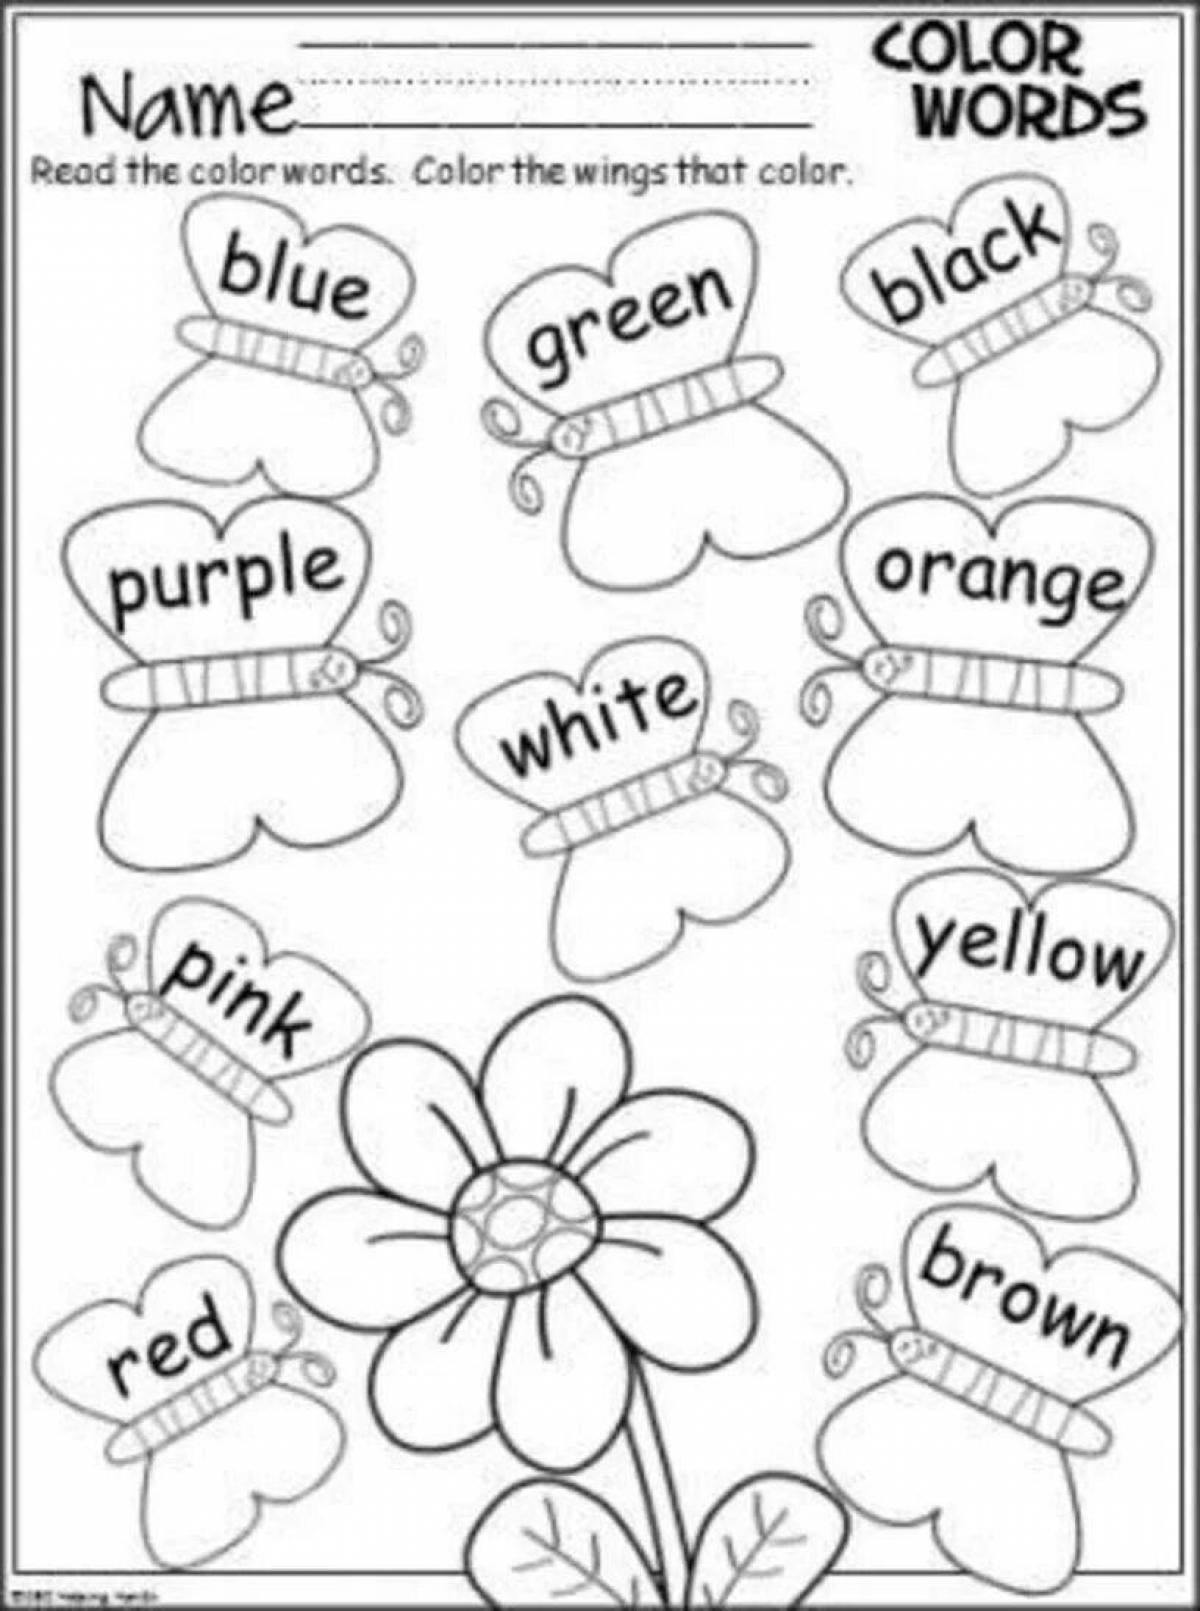 Gorgeous coloring pages in english for kids